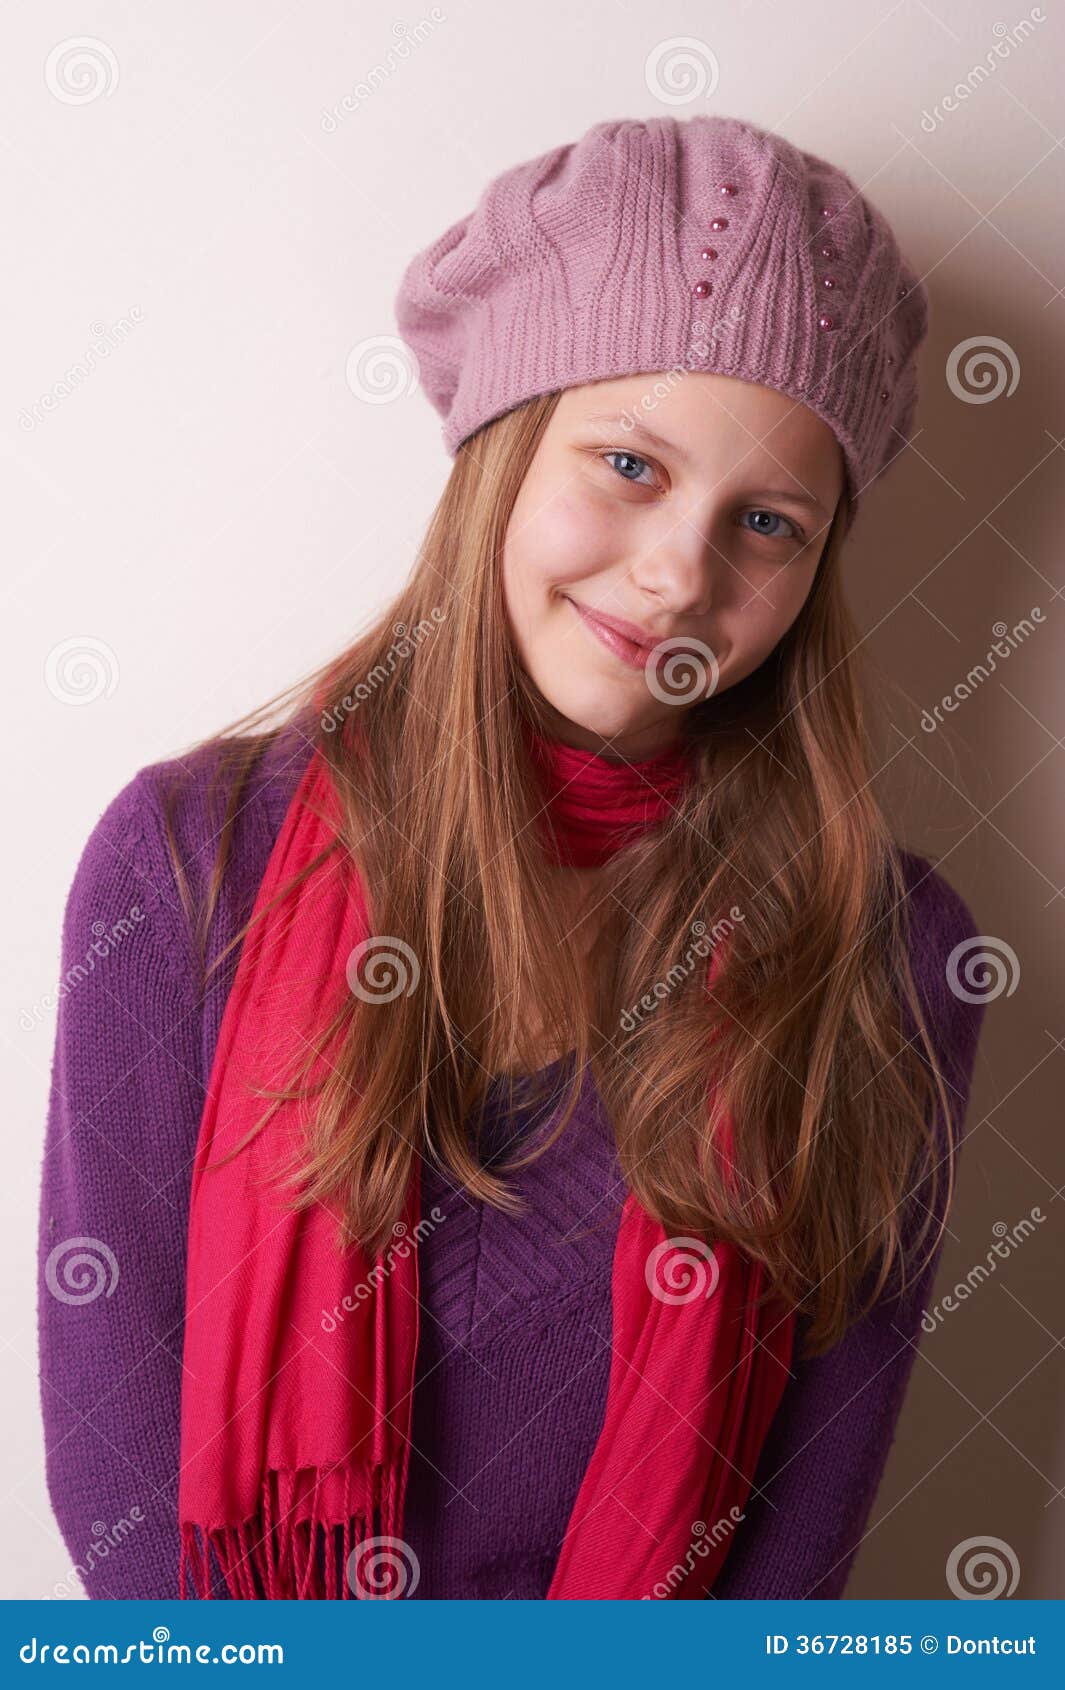 Lovely cute teen girl stock image. Image of carefree - 36728185